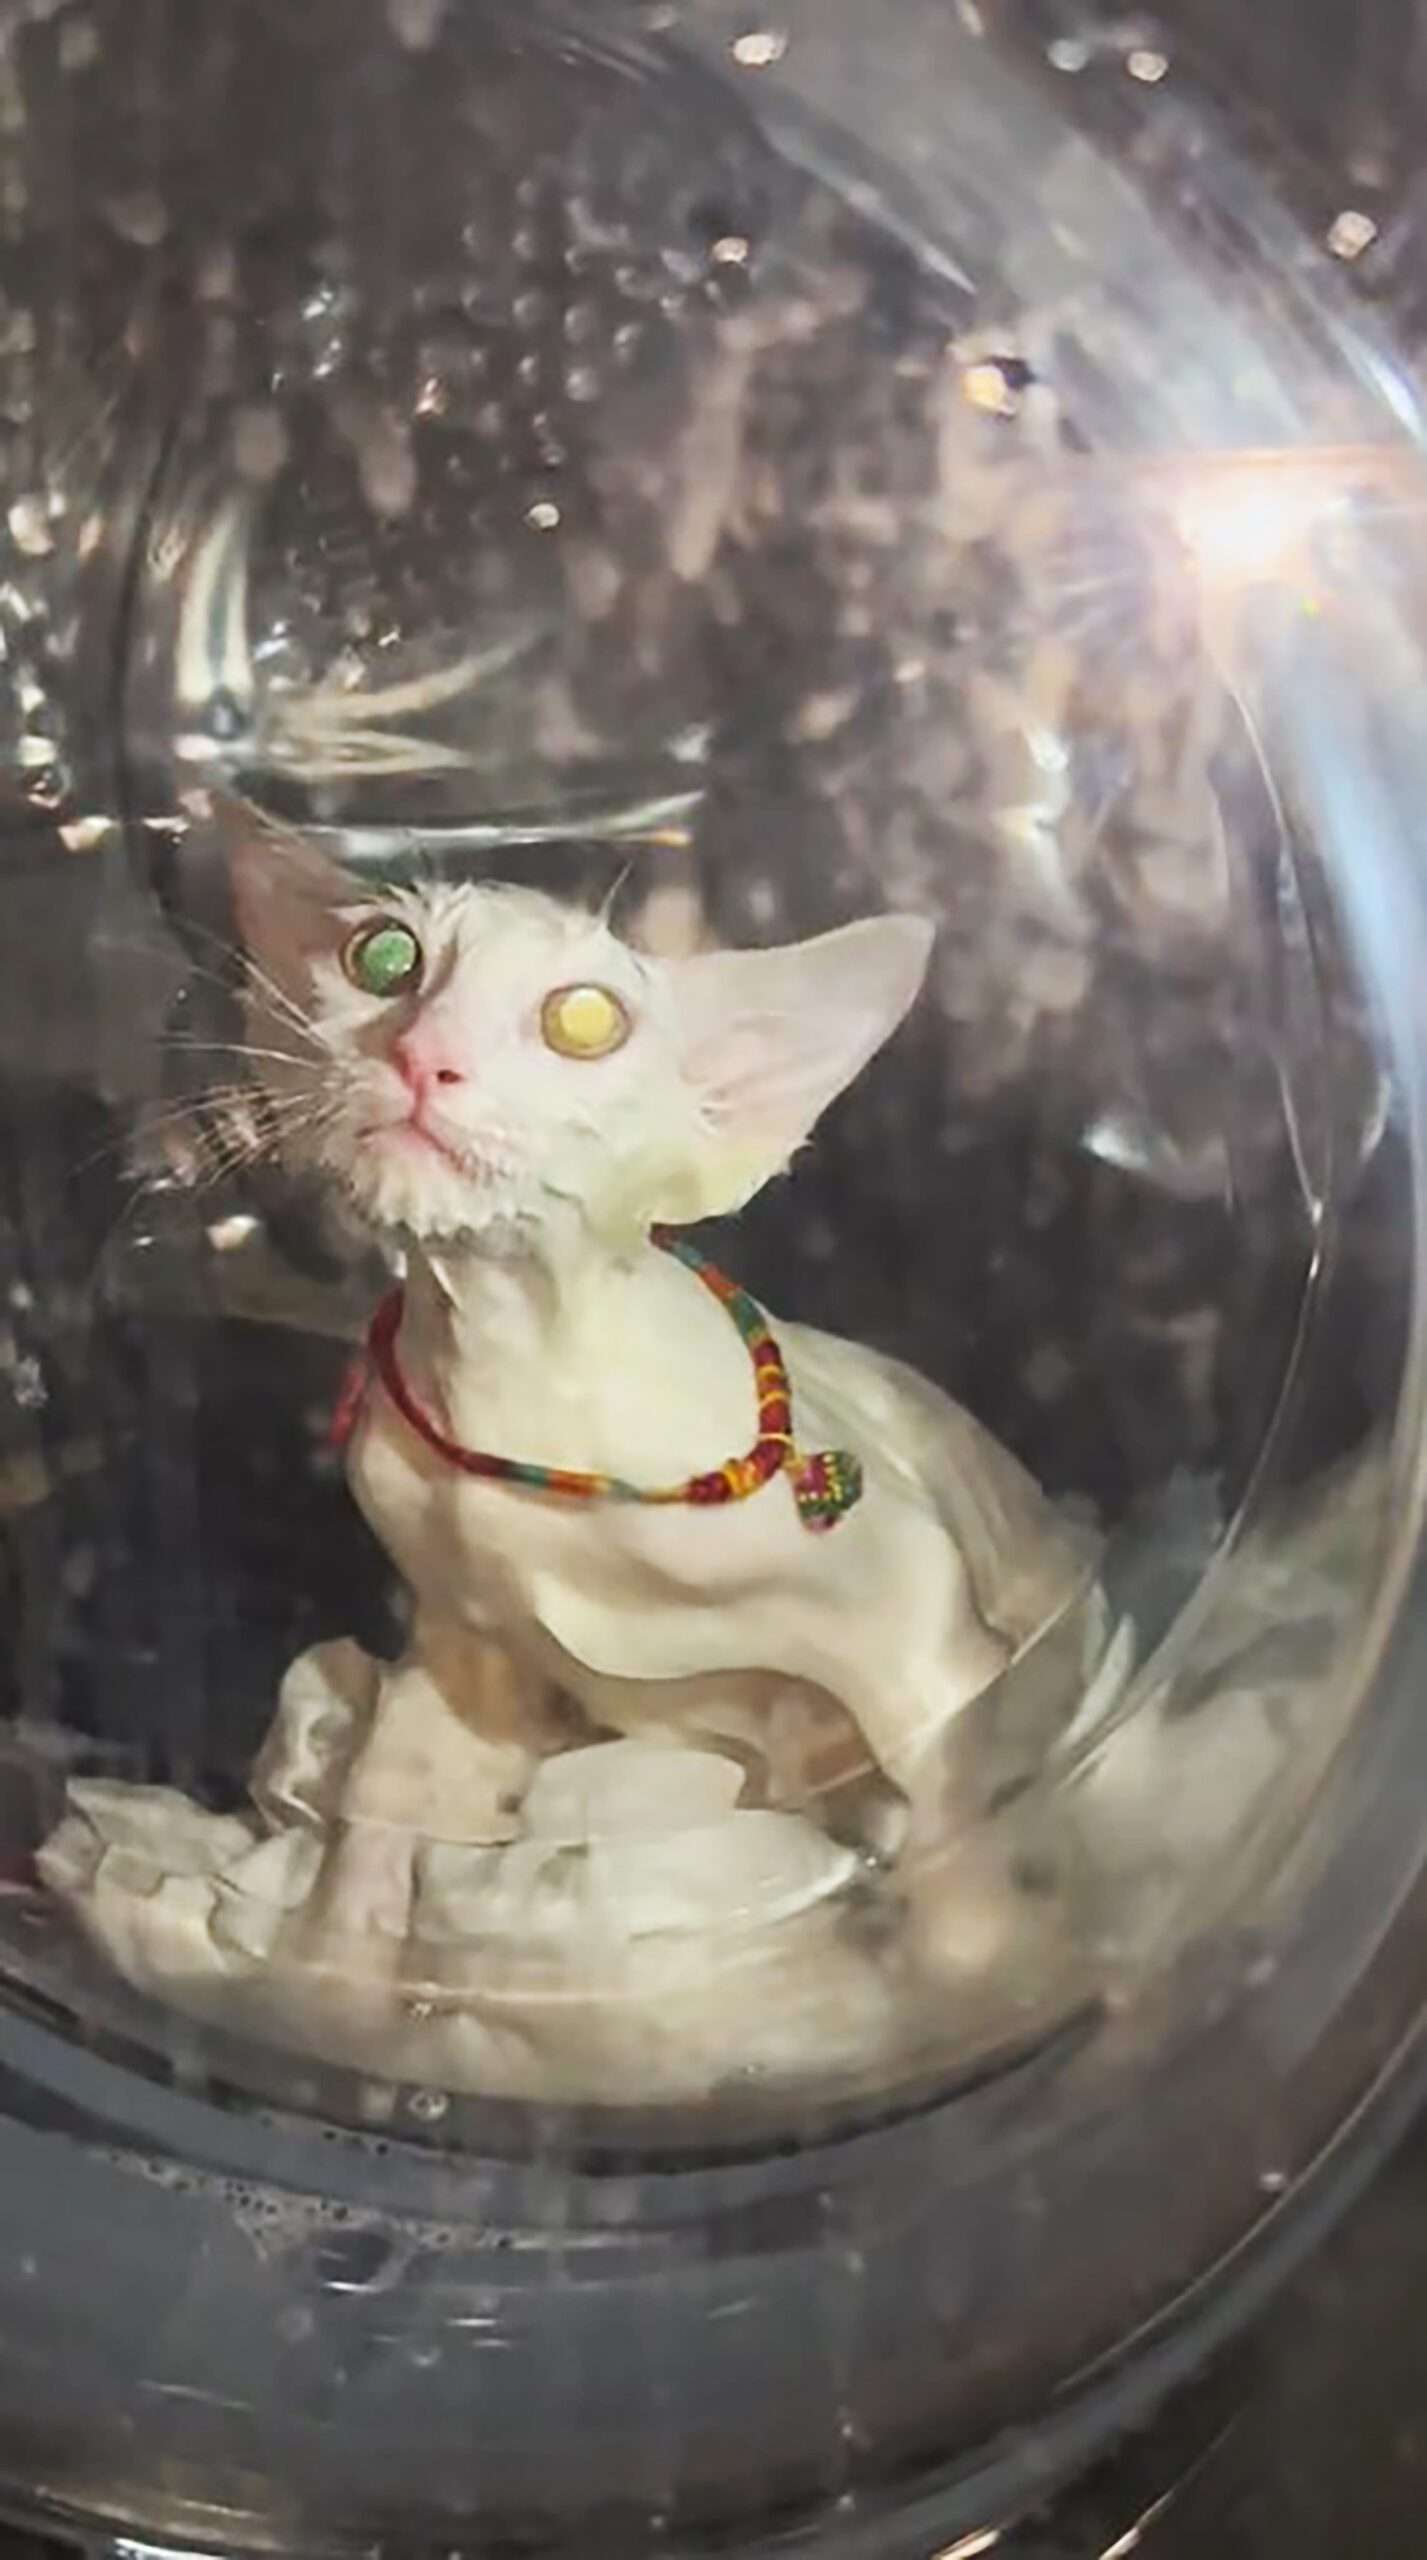 Read more about the article Drowning Cat Rescued Alive From Washing Machine